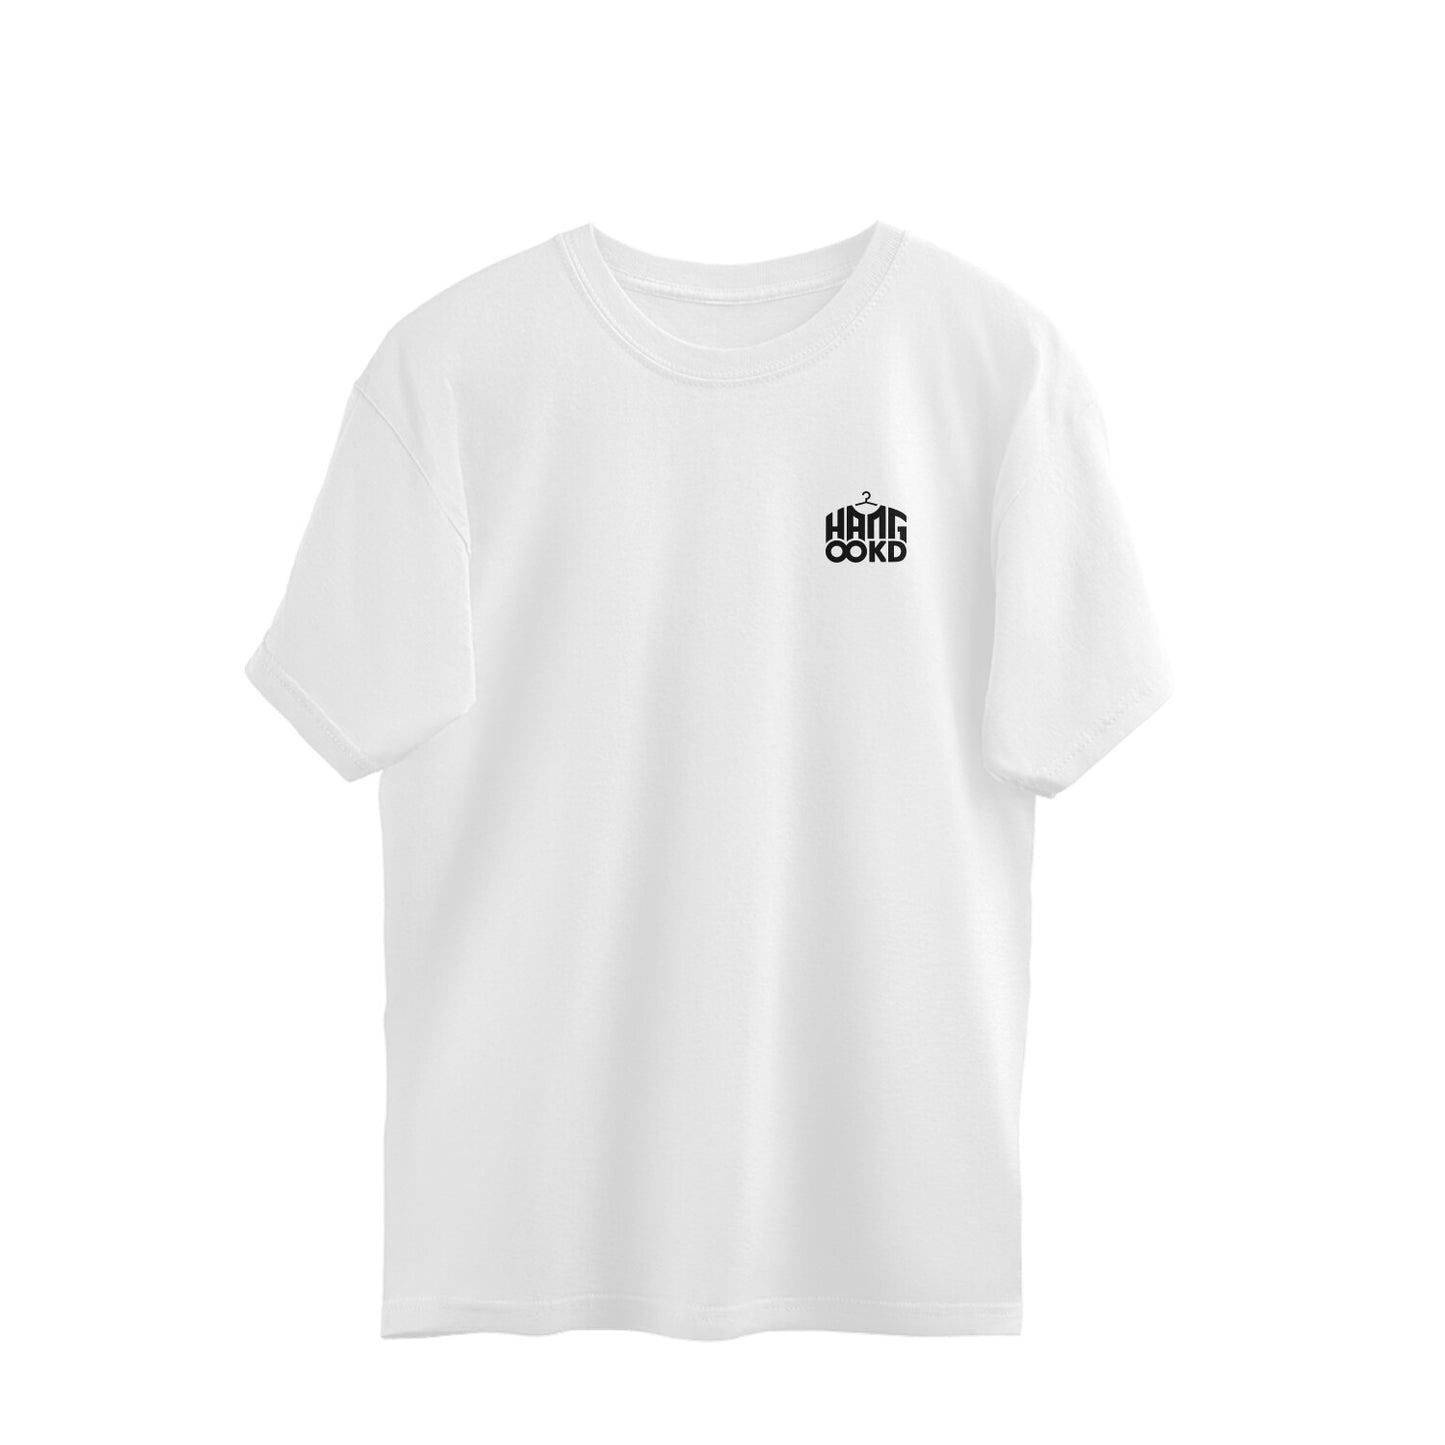 Personalise your name in Korean! - Oversized Tee